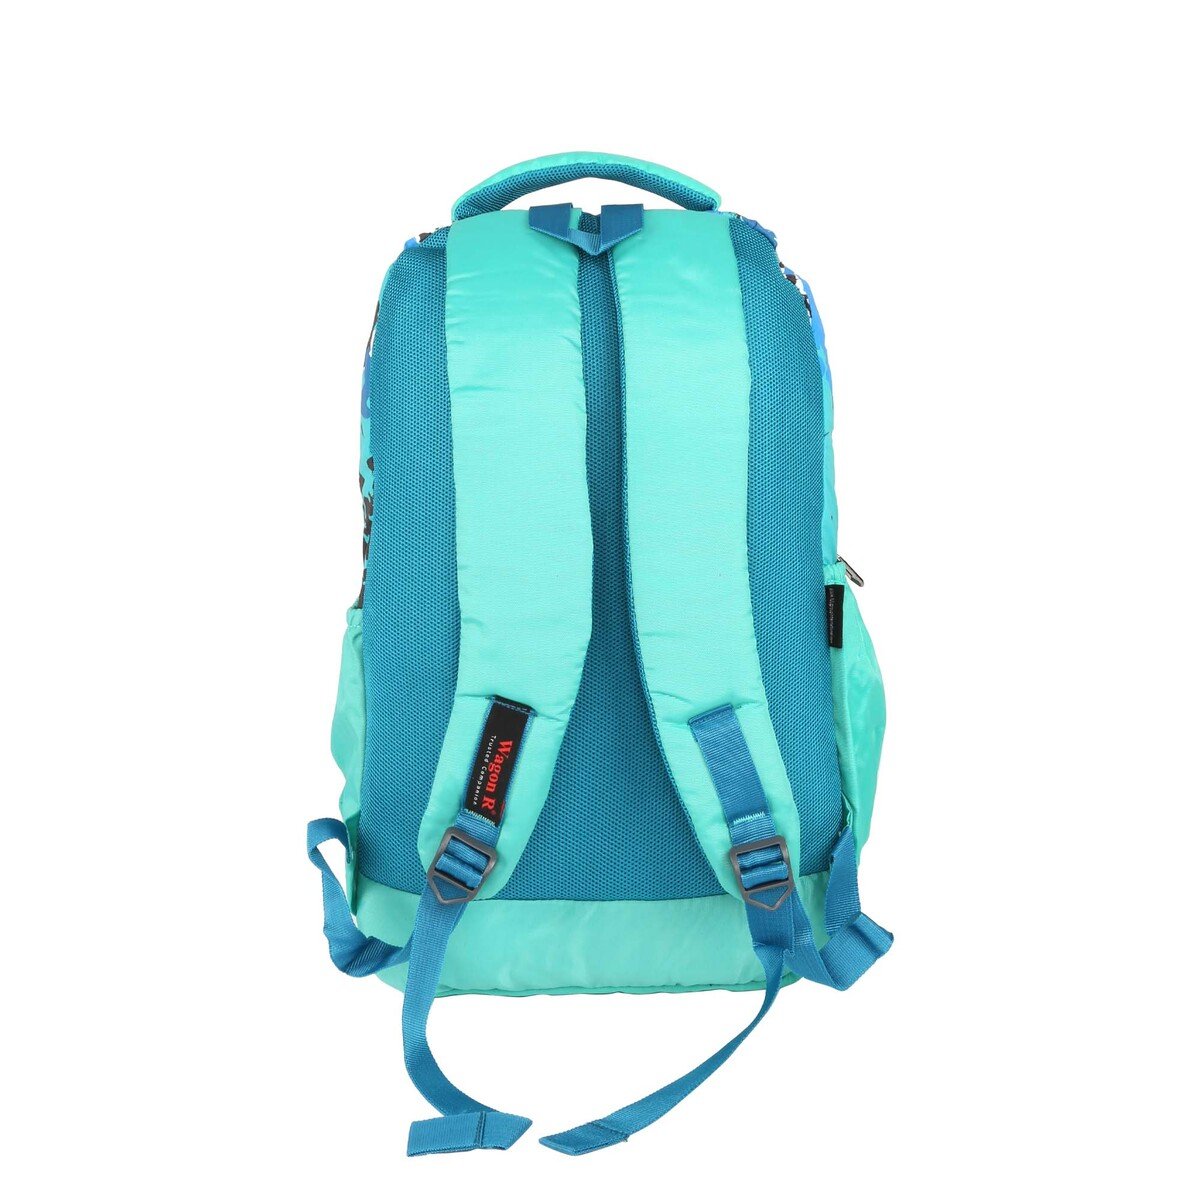 Wagon-R Jazzy Backpack BKP627 19 Inch